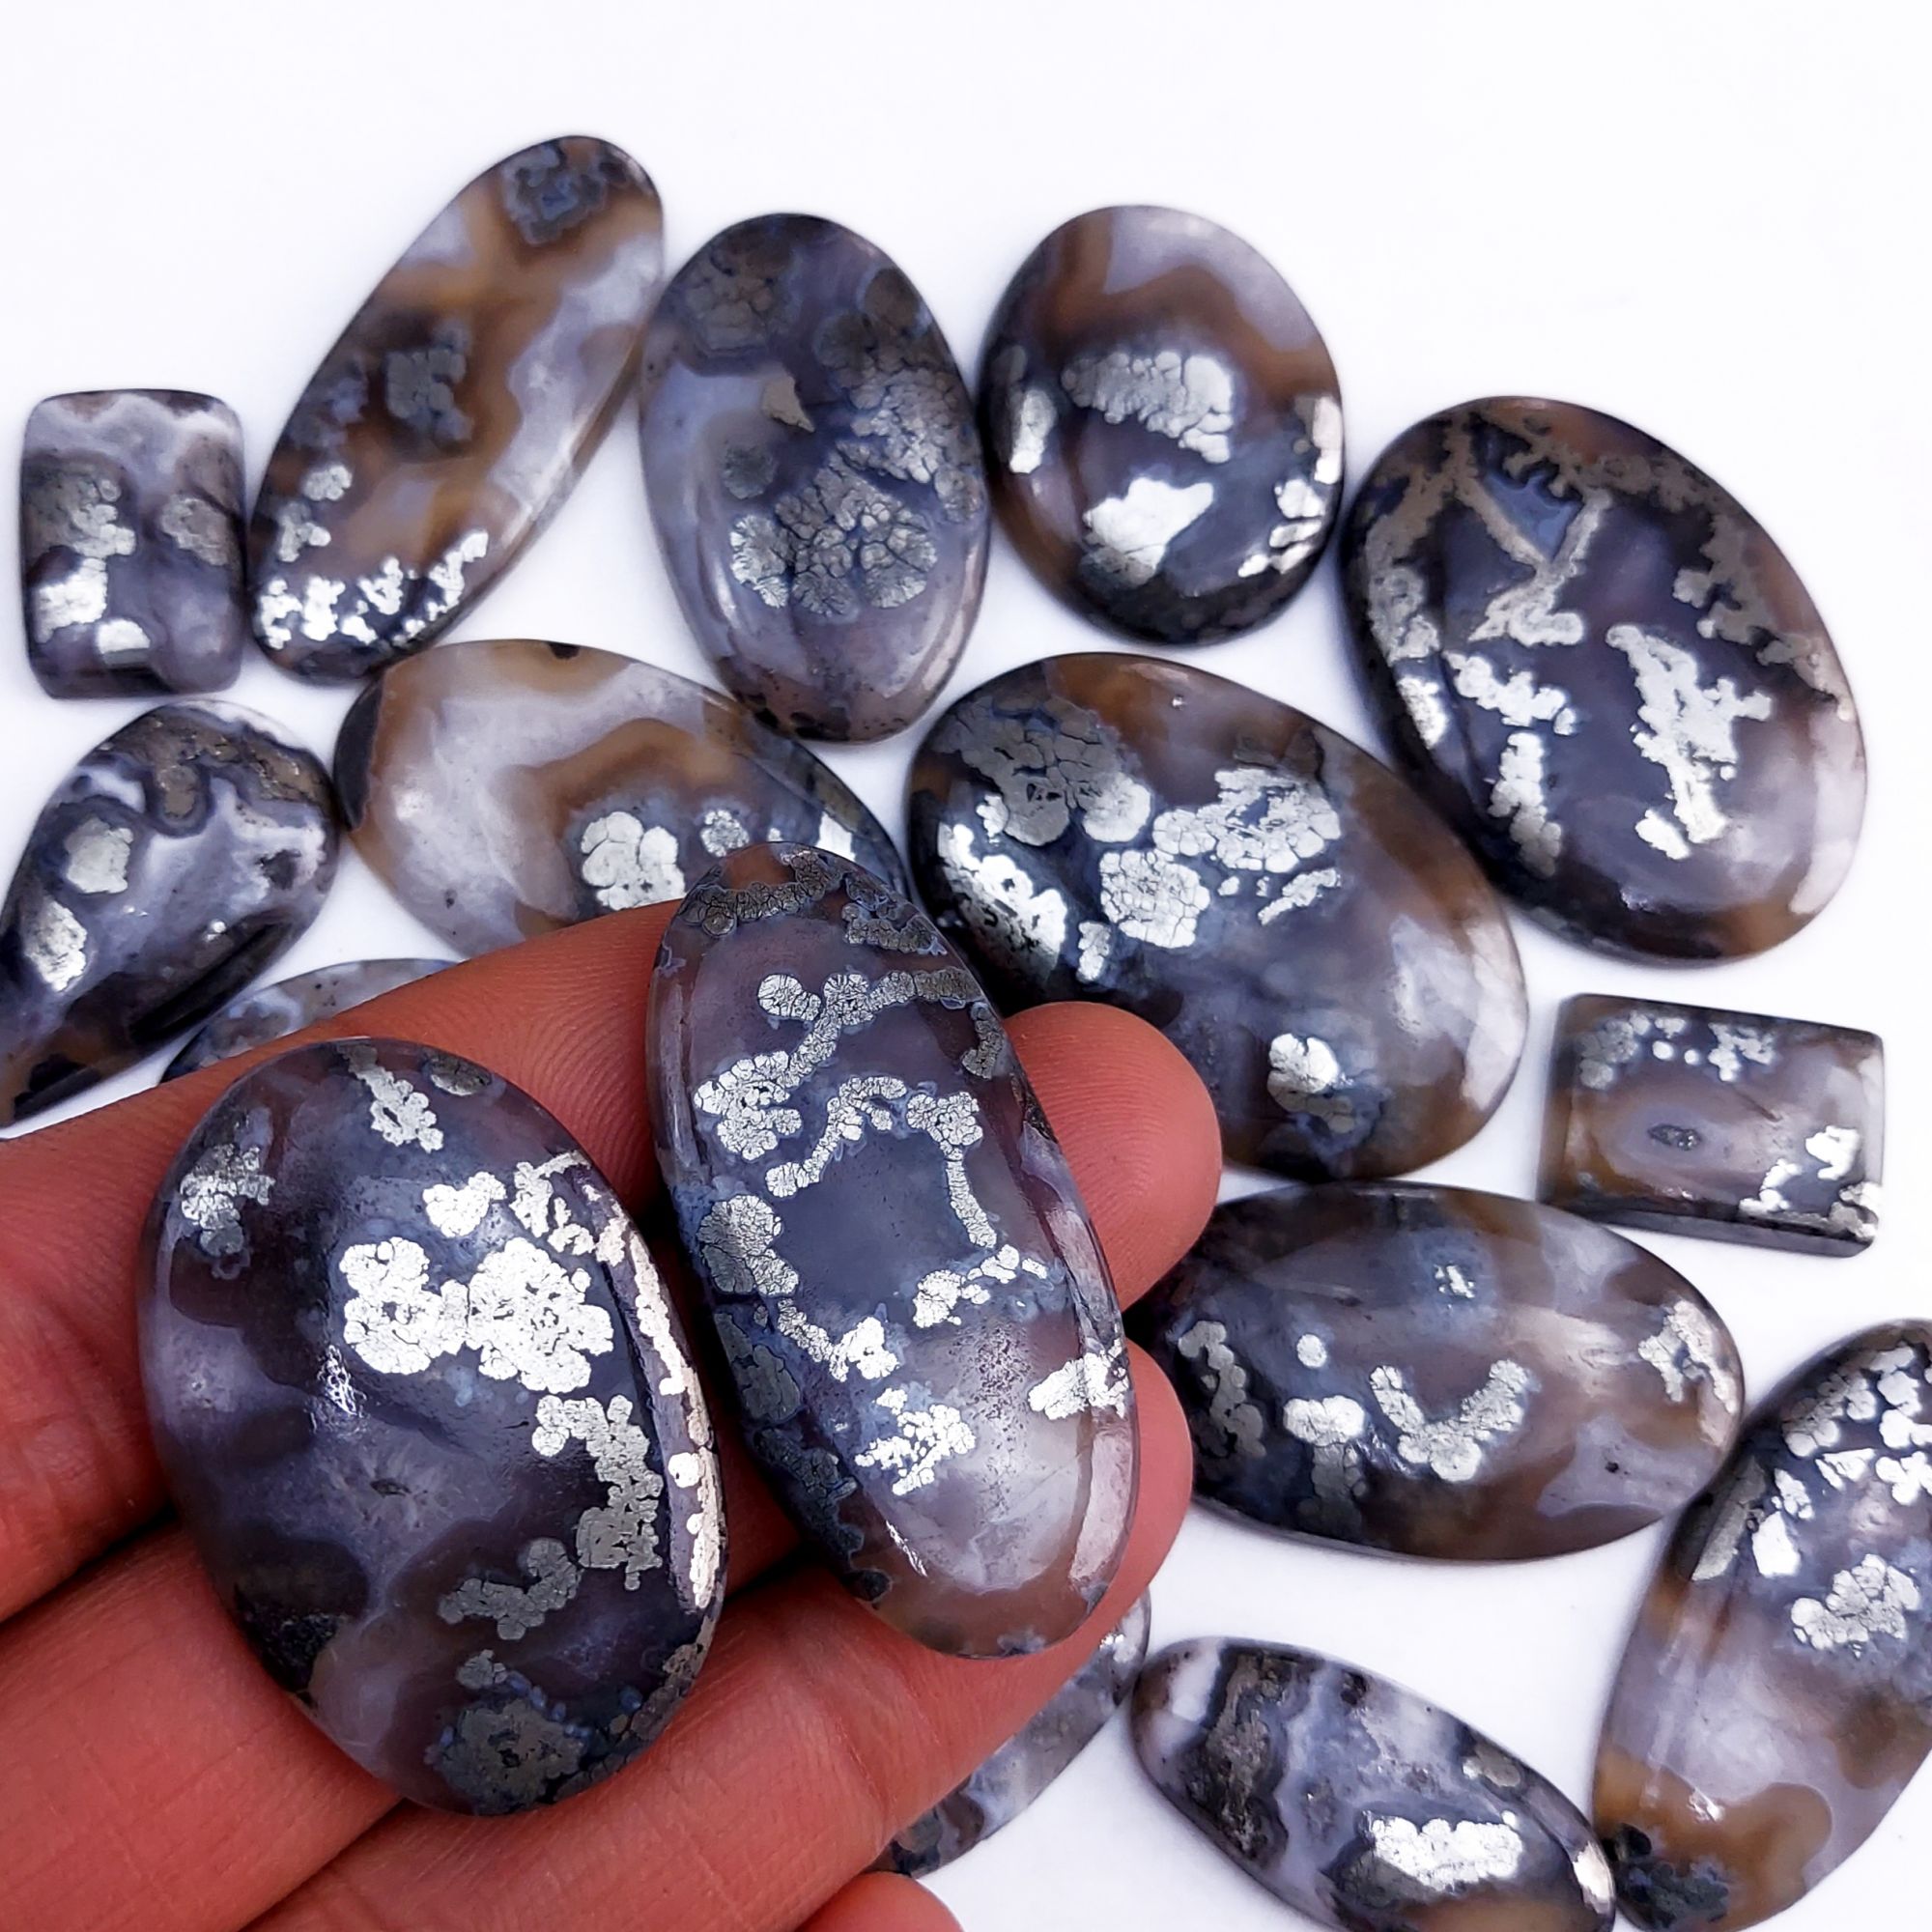 18Pcs 674Cts Natural Marcasite Grey Cabochon Back Side Unpolished Gemstone Semi-Precious Gemstones For Jewelry Making 42x20 20x14mm #10034